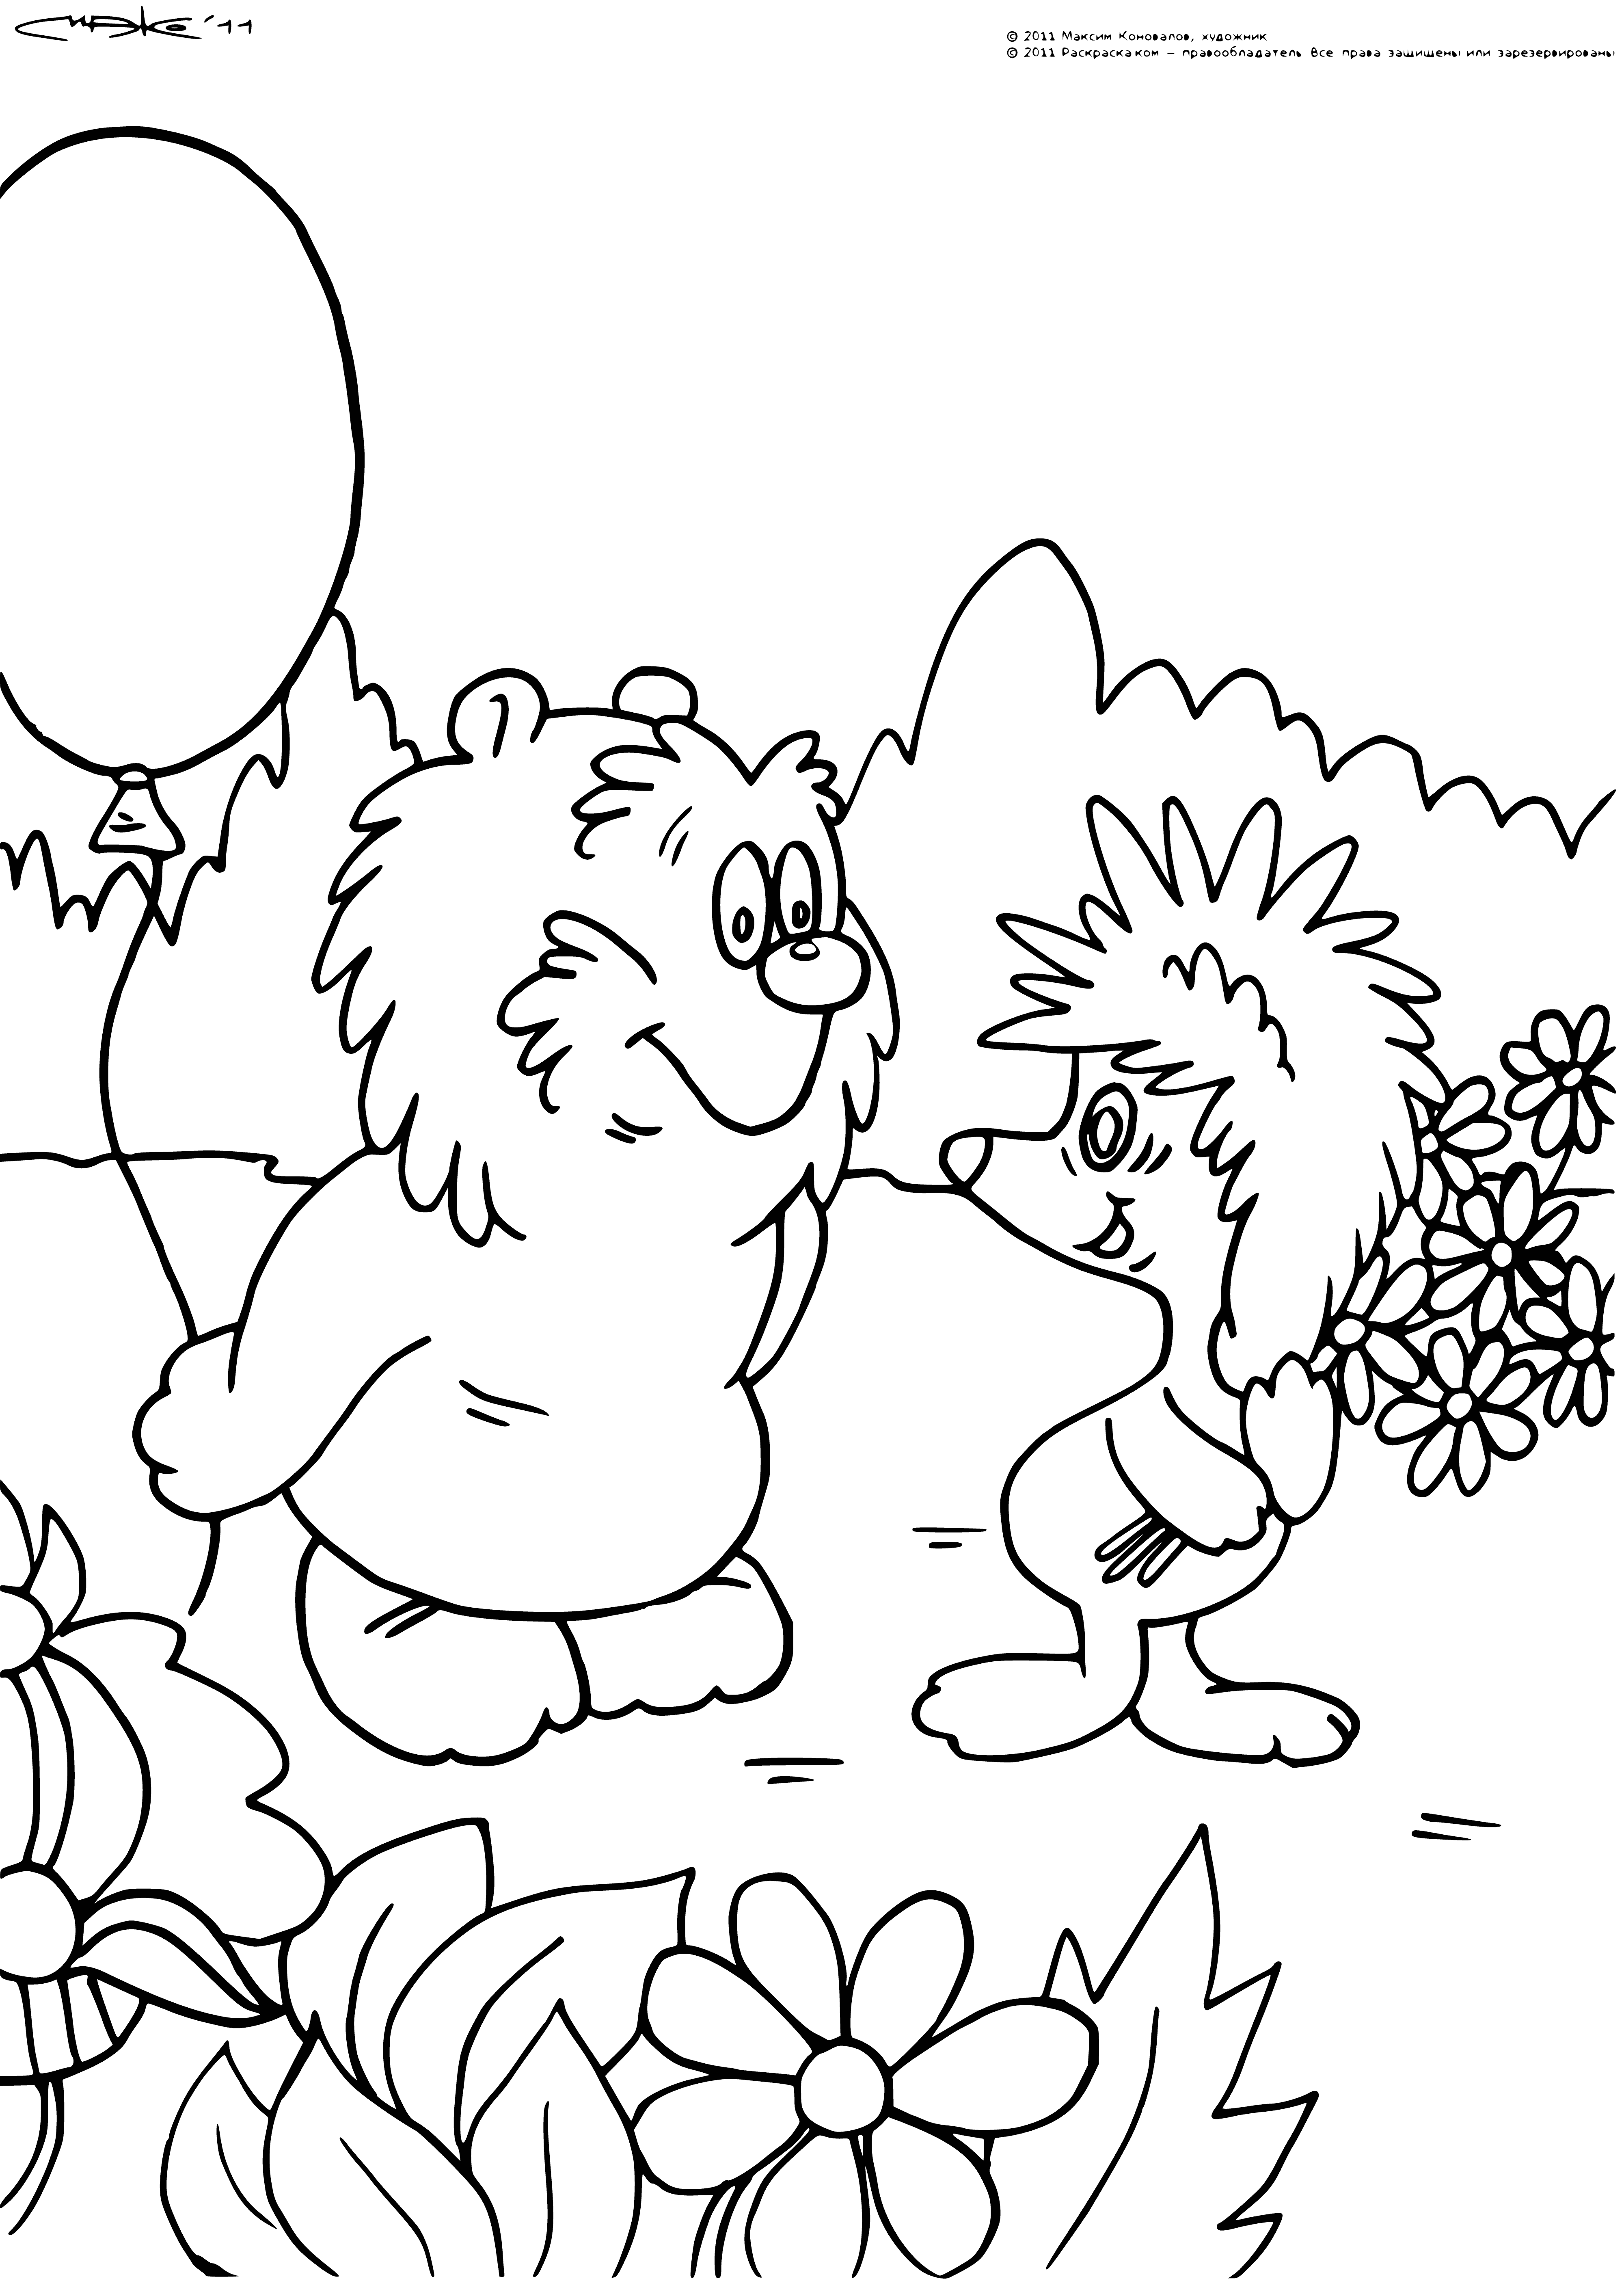 coloring page: 140 Chars: A large brown bear roars while a small brown hedgehog looks up at him, not scared, as if ready to speak.